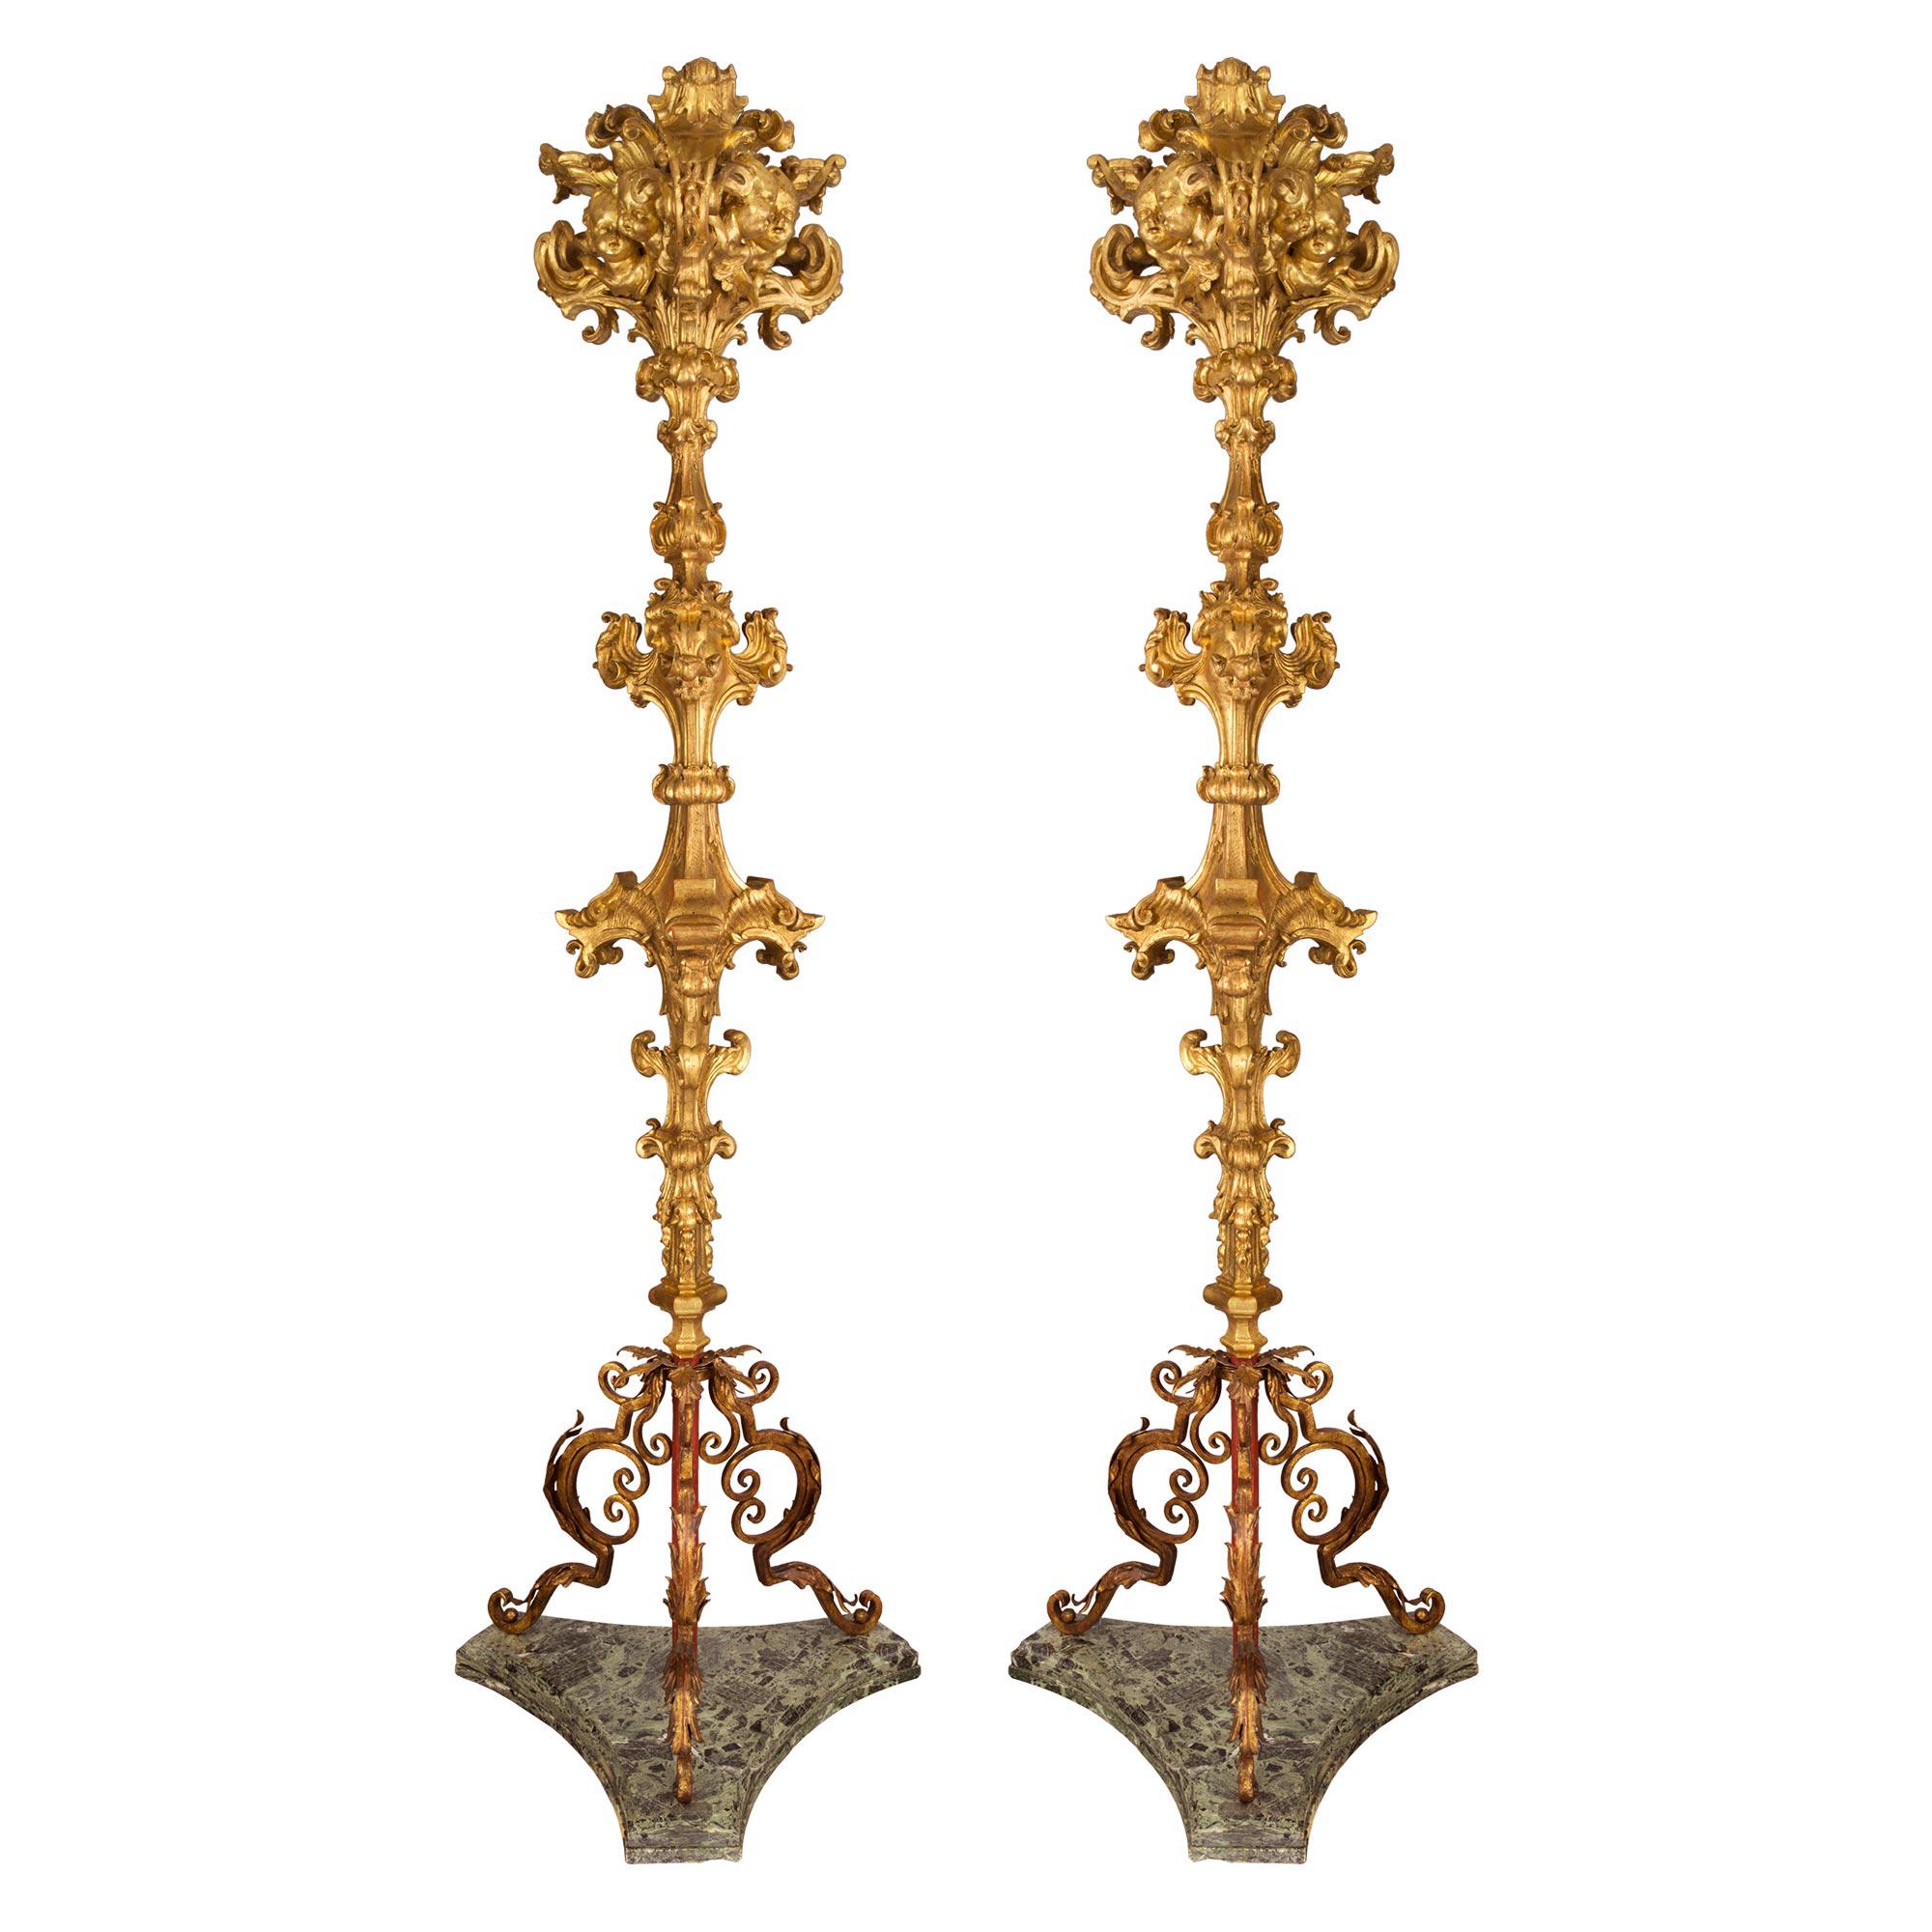 Pair of Italian 17th Century Baroque Period Giltwood Floor Lamps For Sale